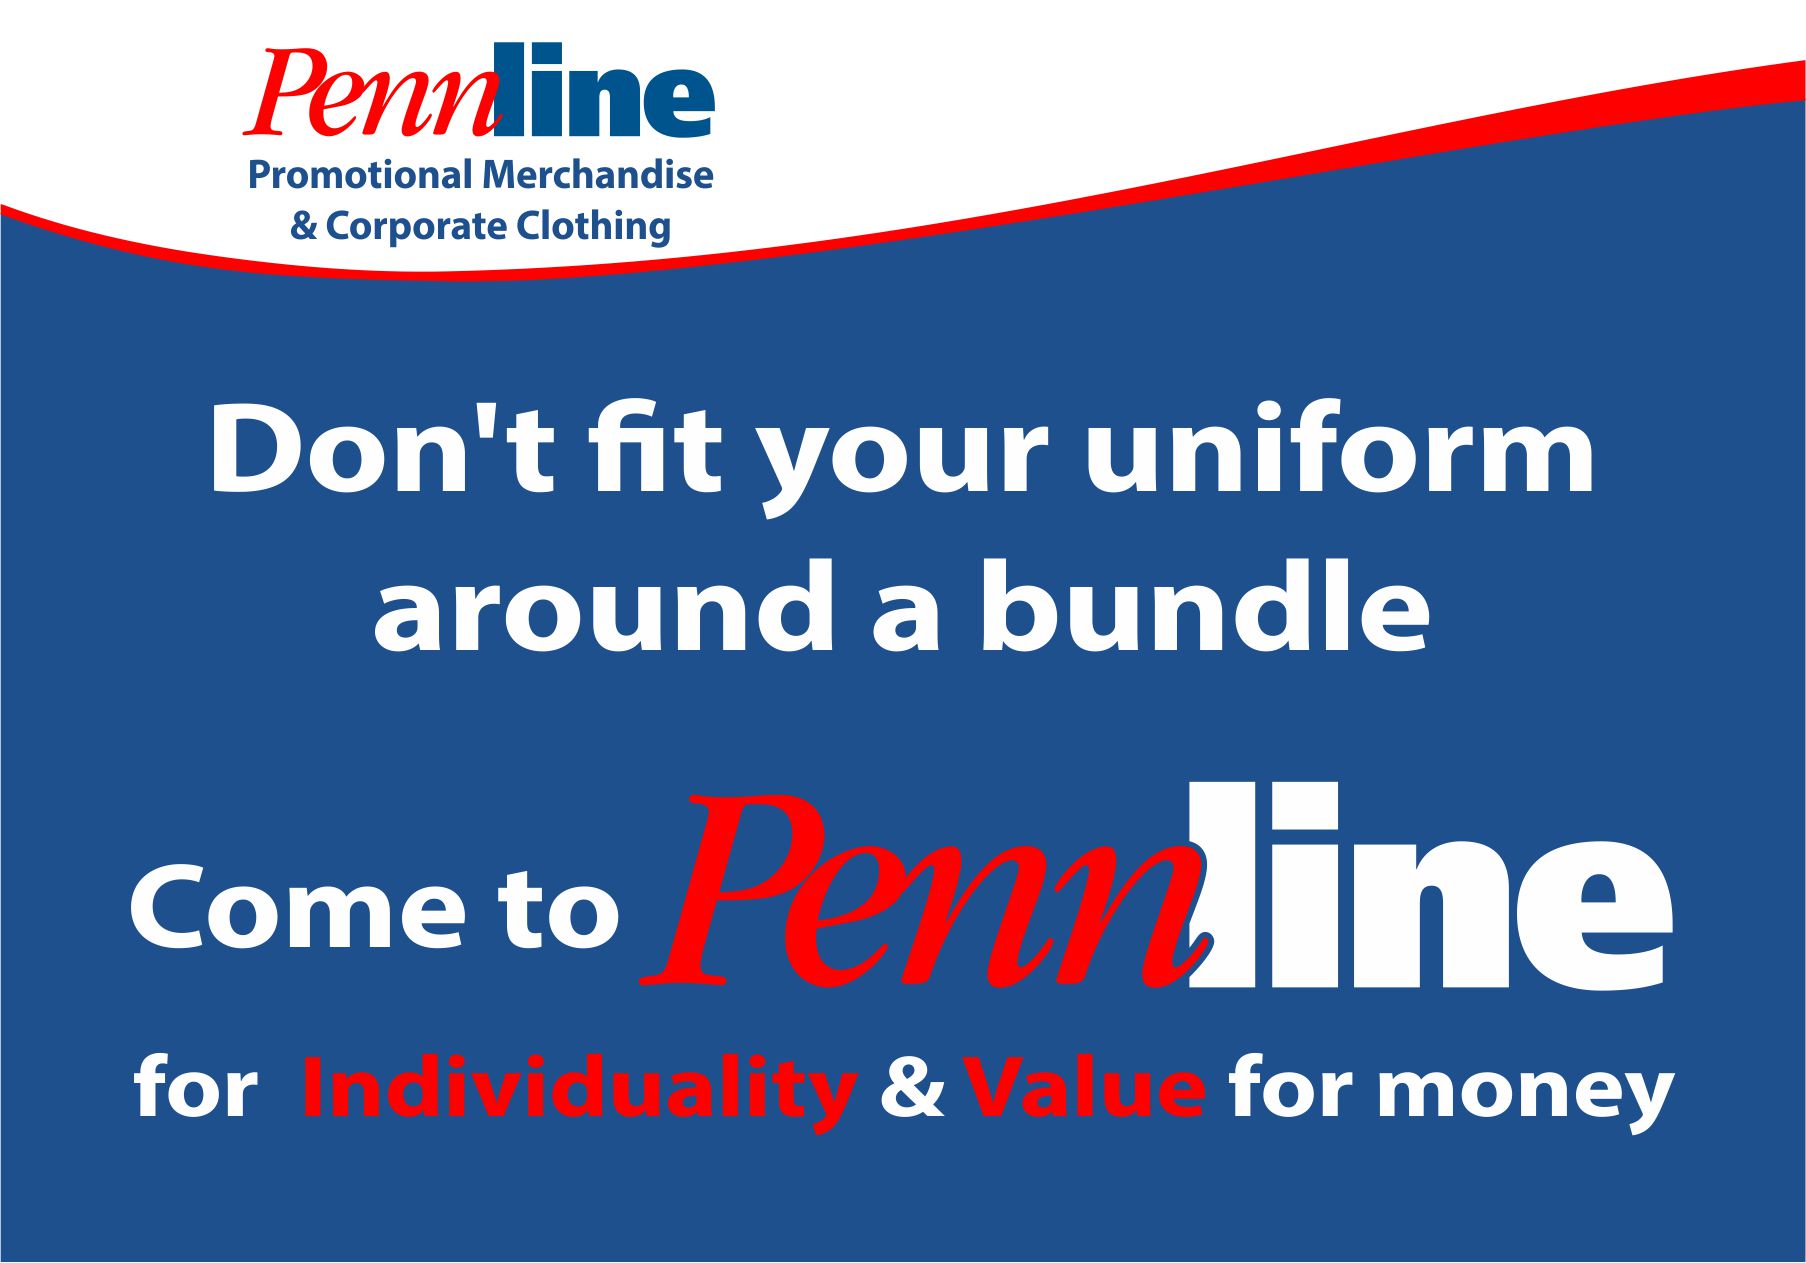 With the start of the New Year, it seems like the ideal opportunity to review you corporate branding, marketing strategy and company workwear requirements.  The team at Pennline are here to help you select the ideal solutions for your organisation.